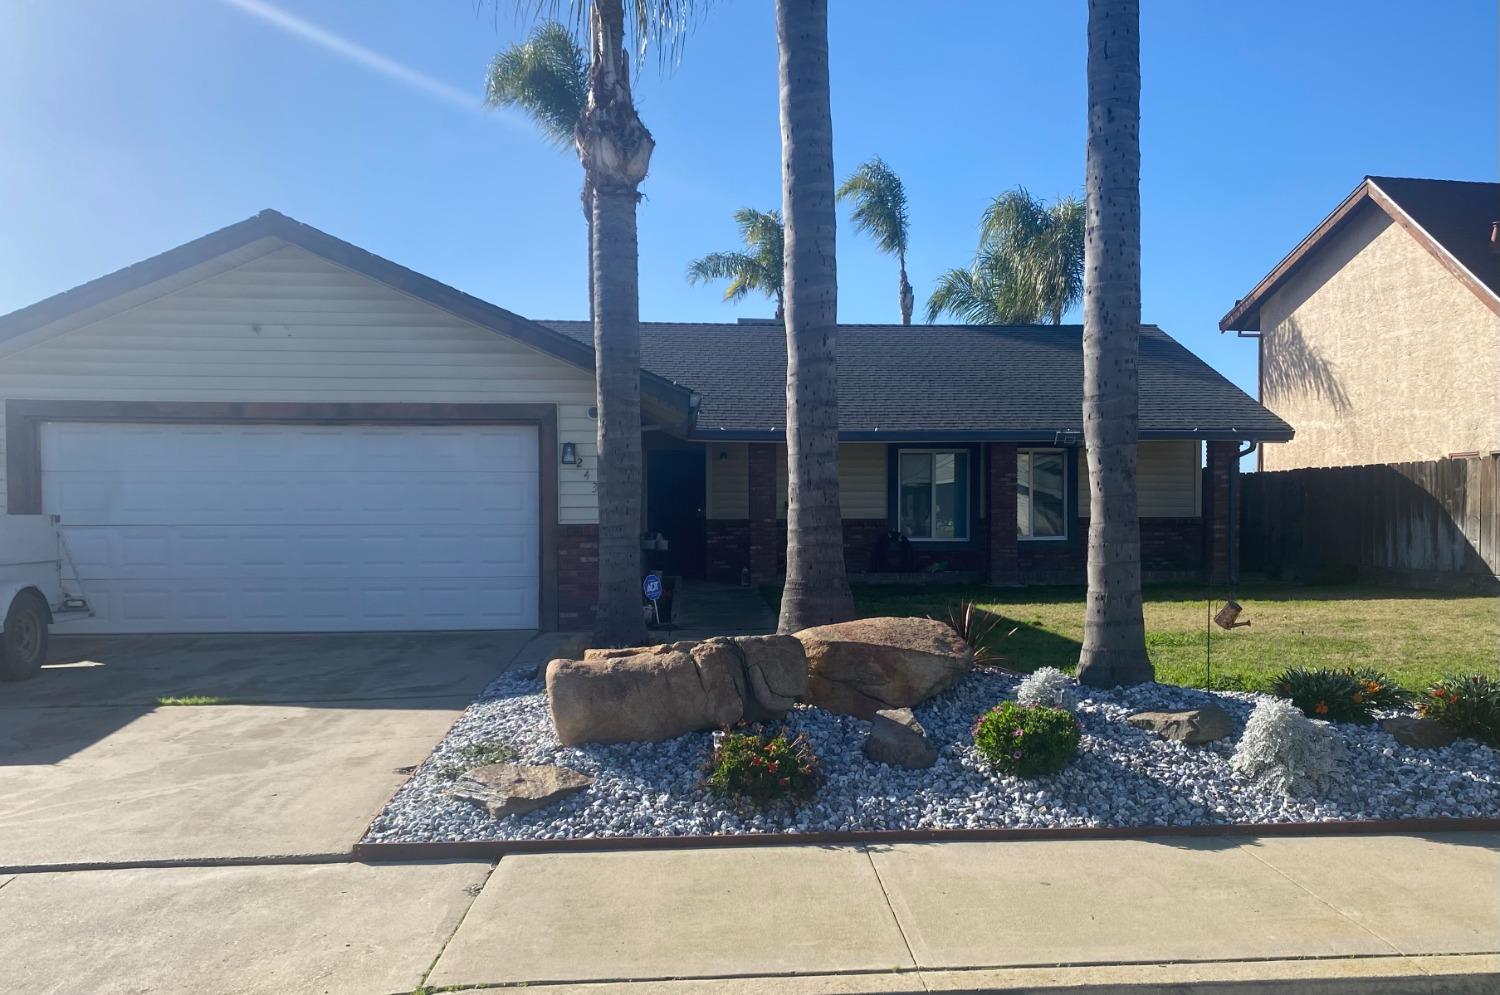 Photo of 2439 Canal Dr in Atwater, CA